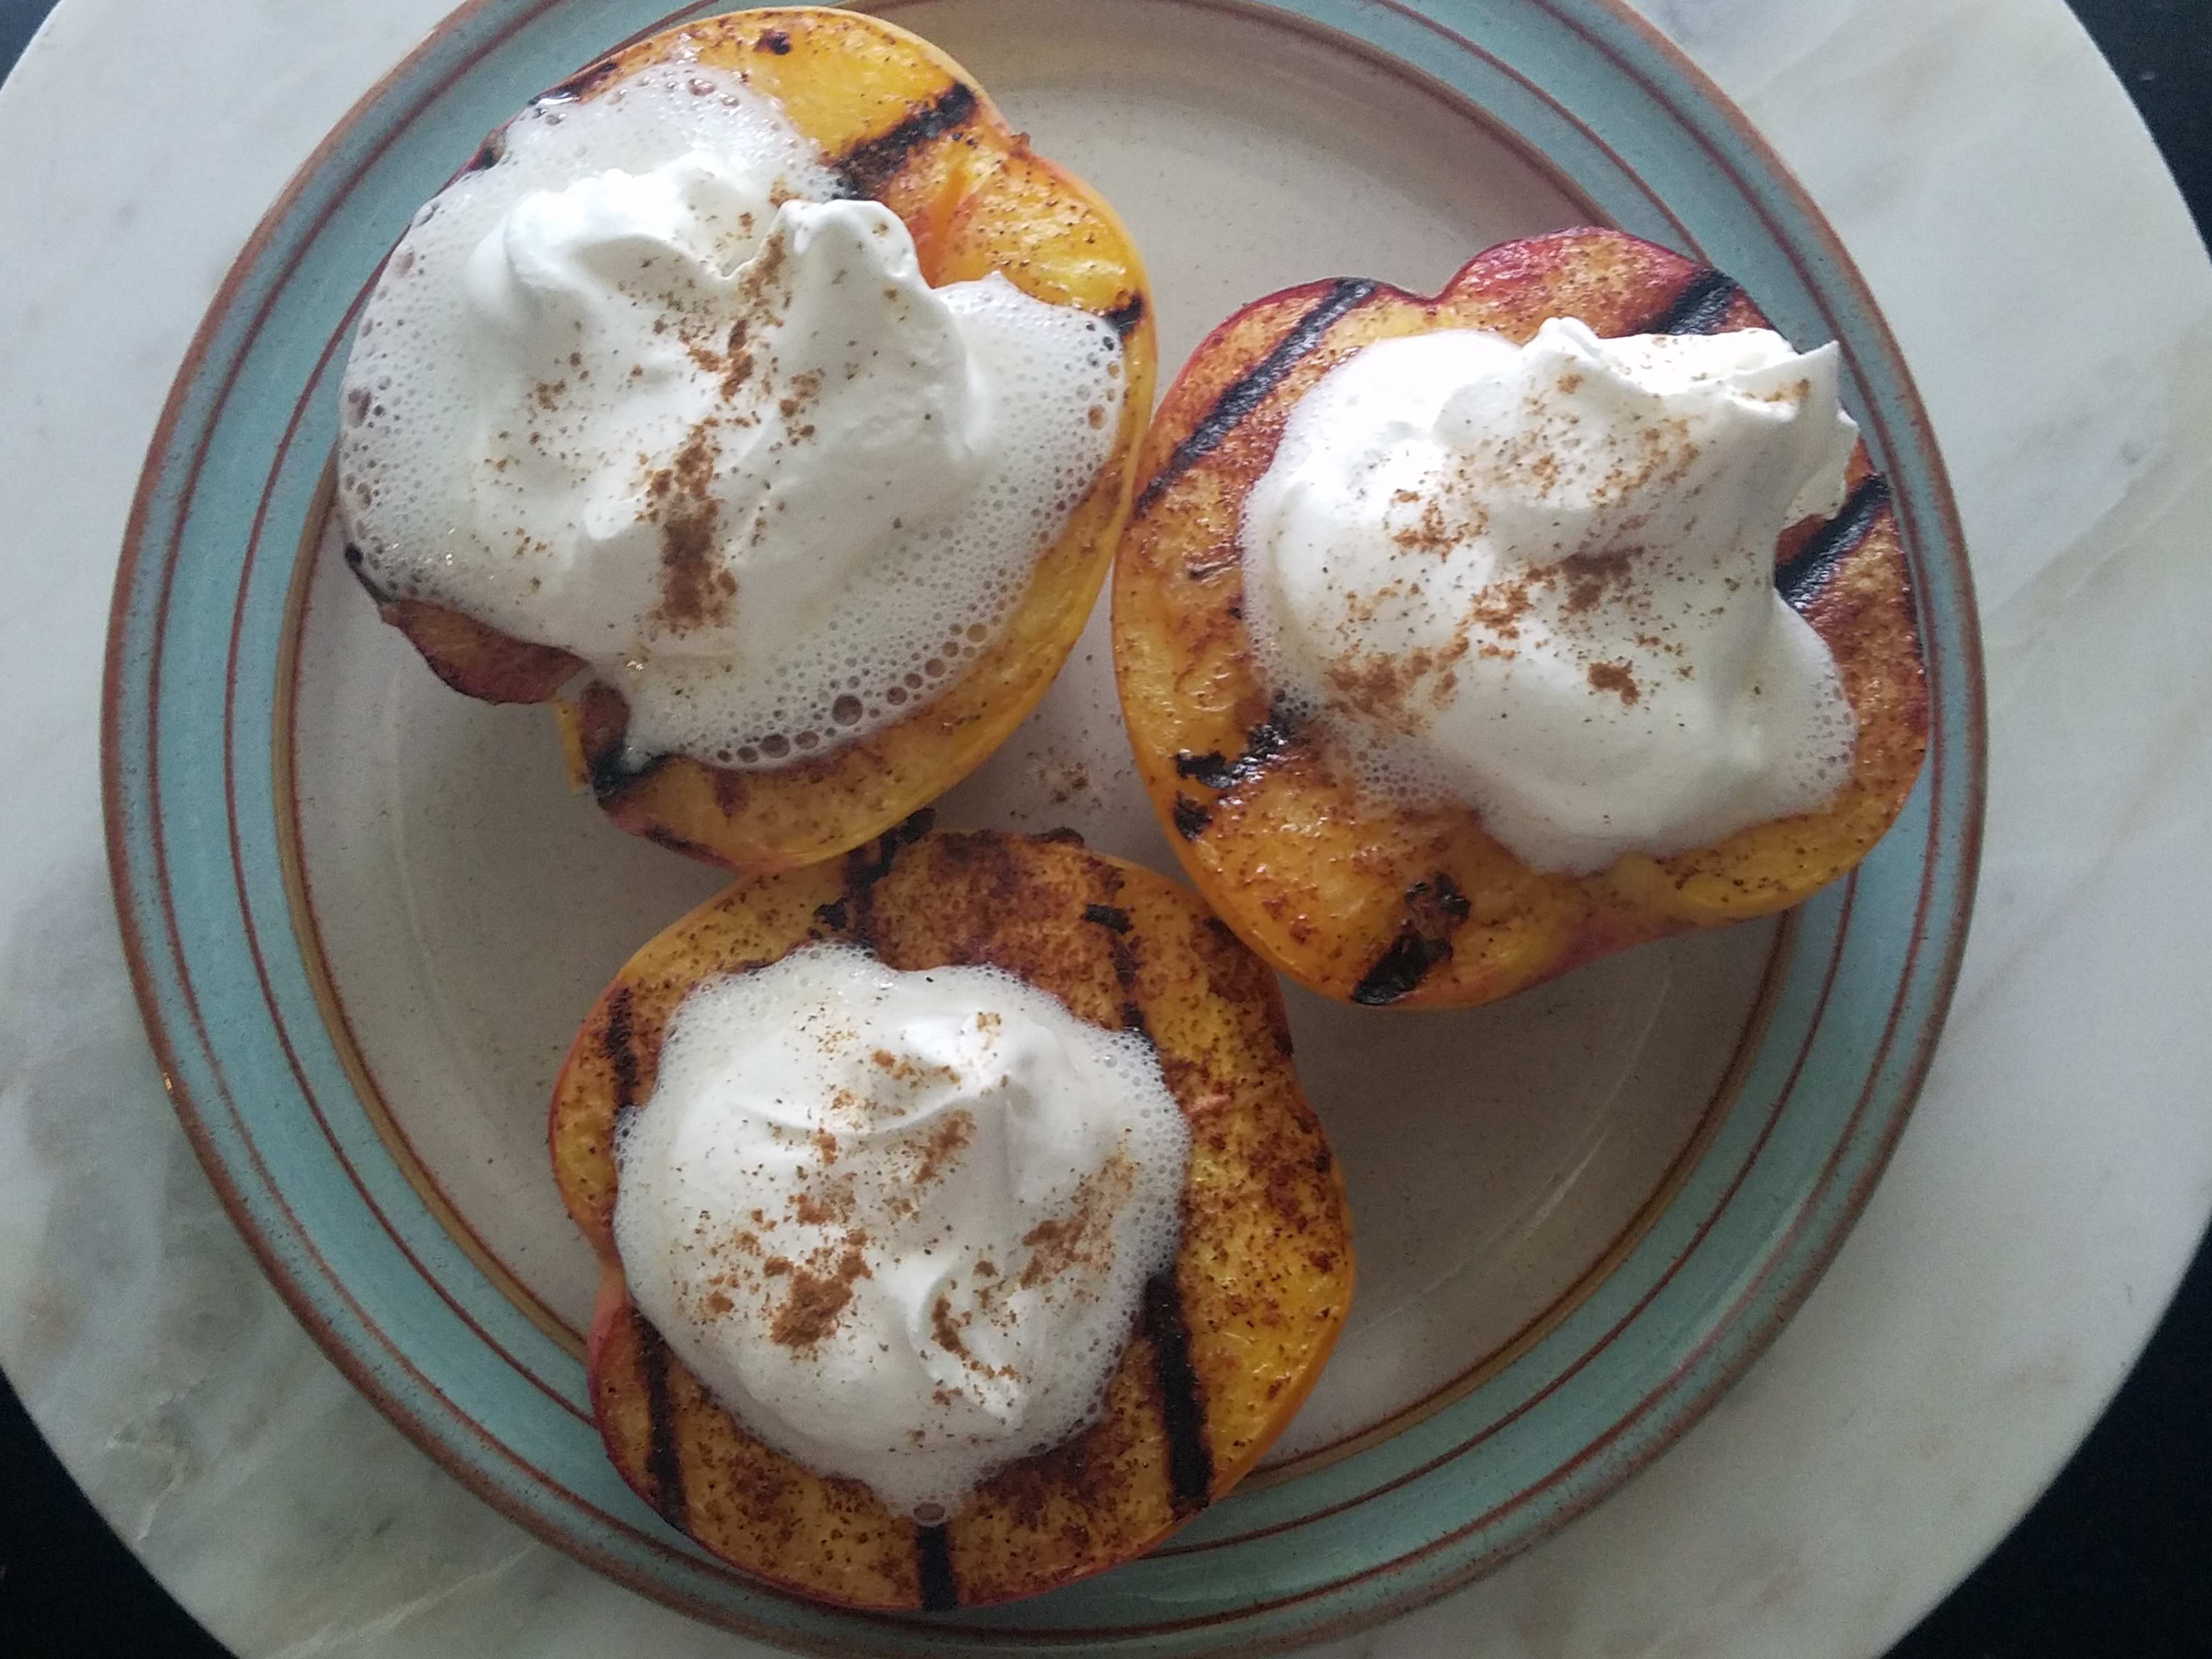 Grilled Peaches with Cinnamon and Cream